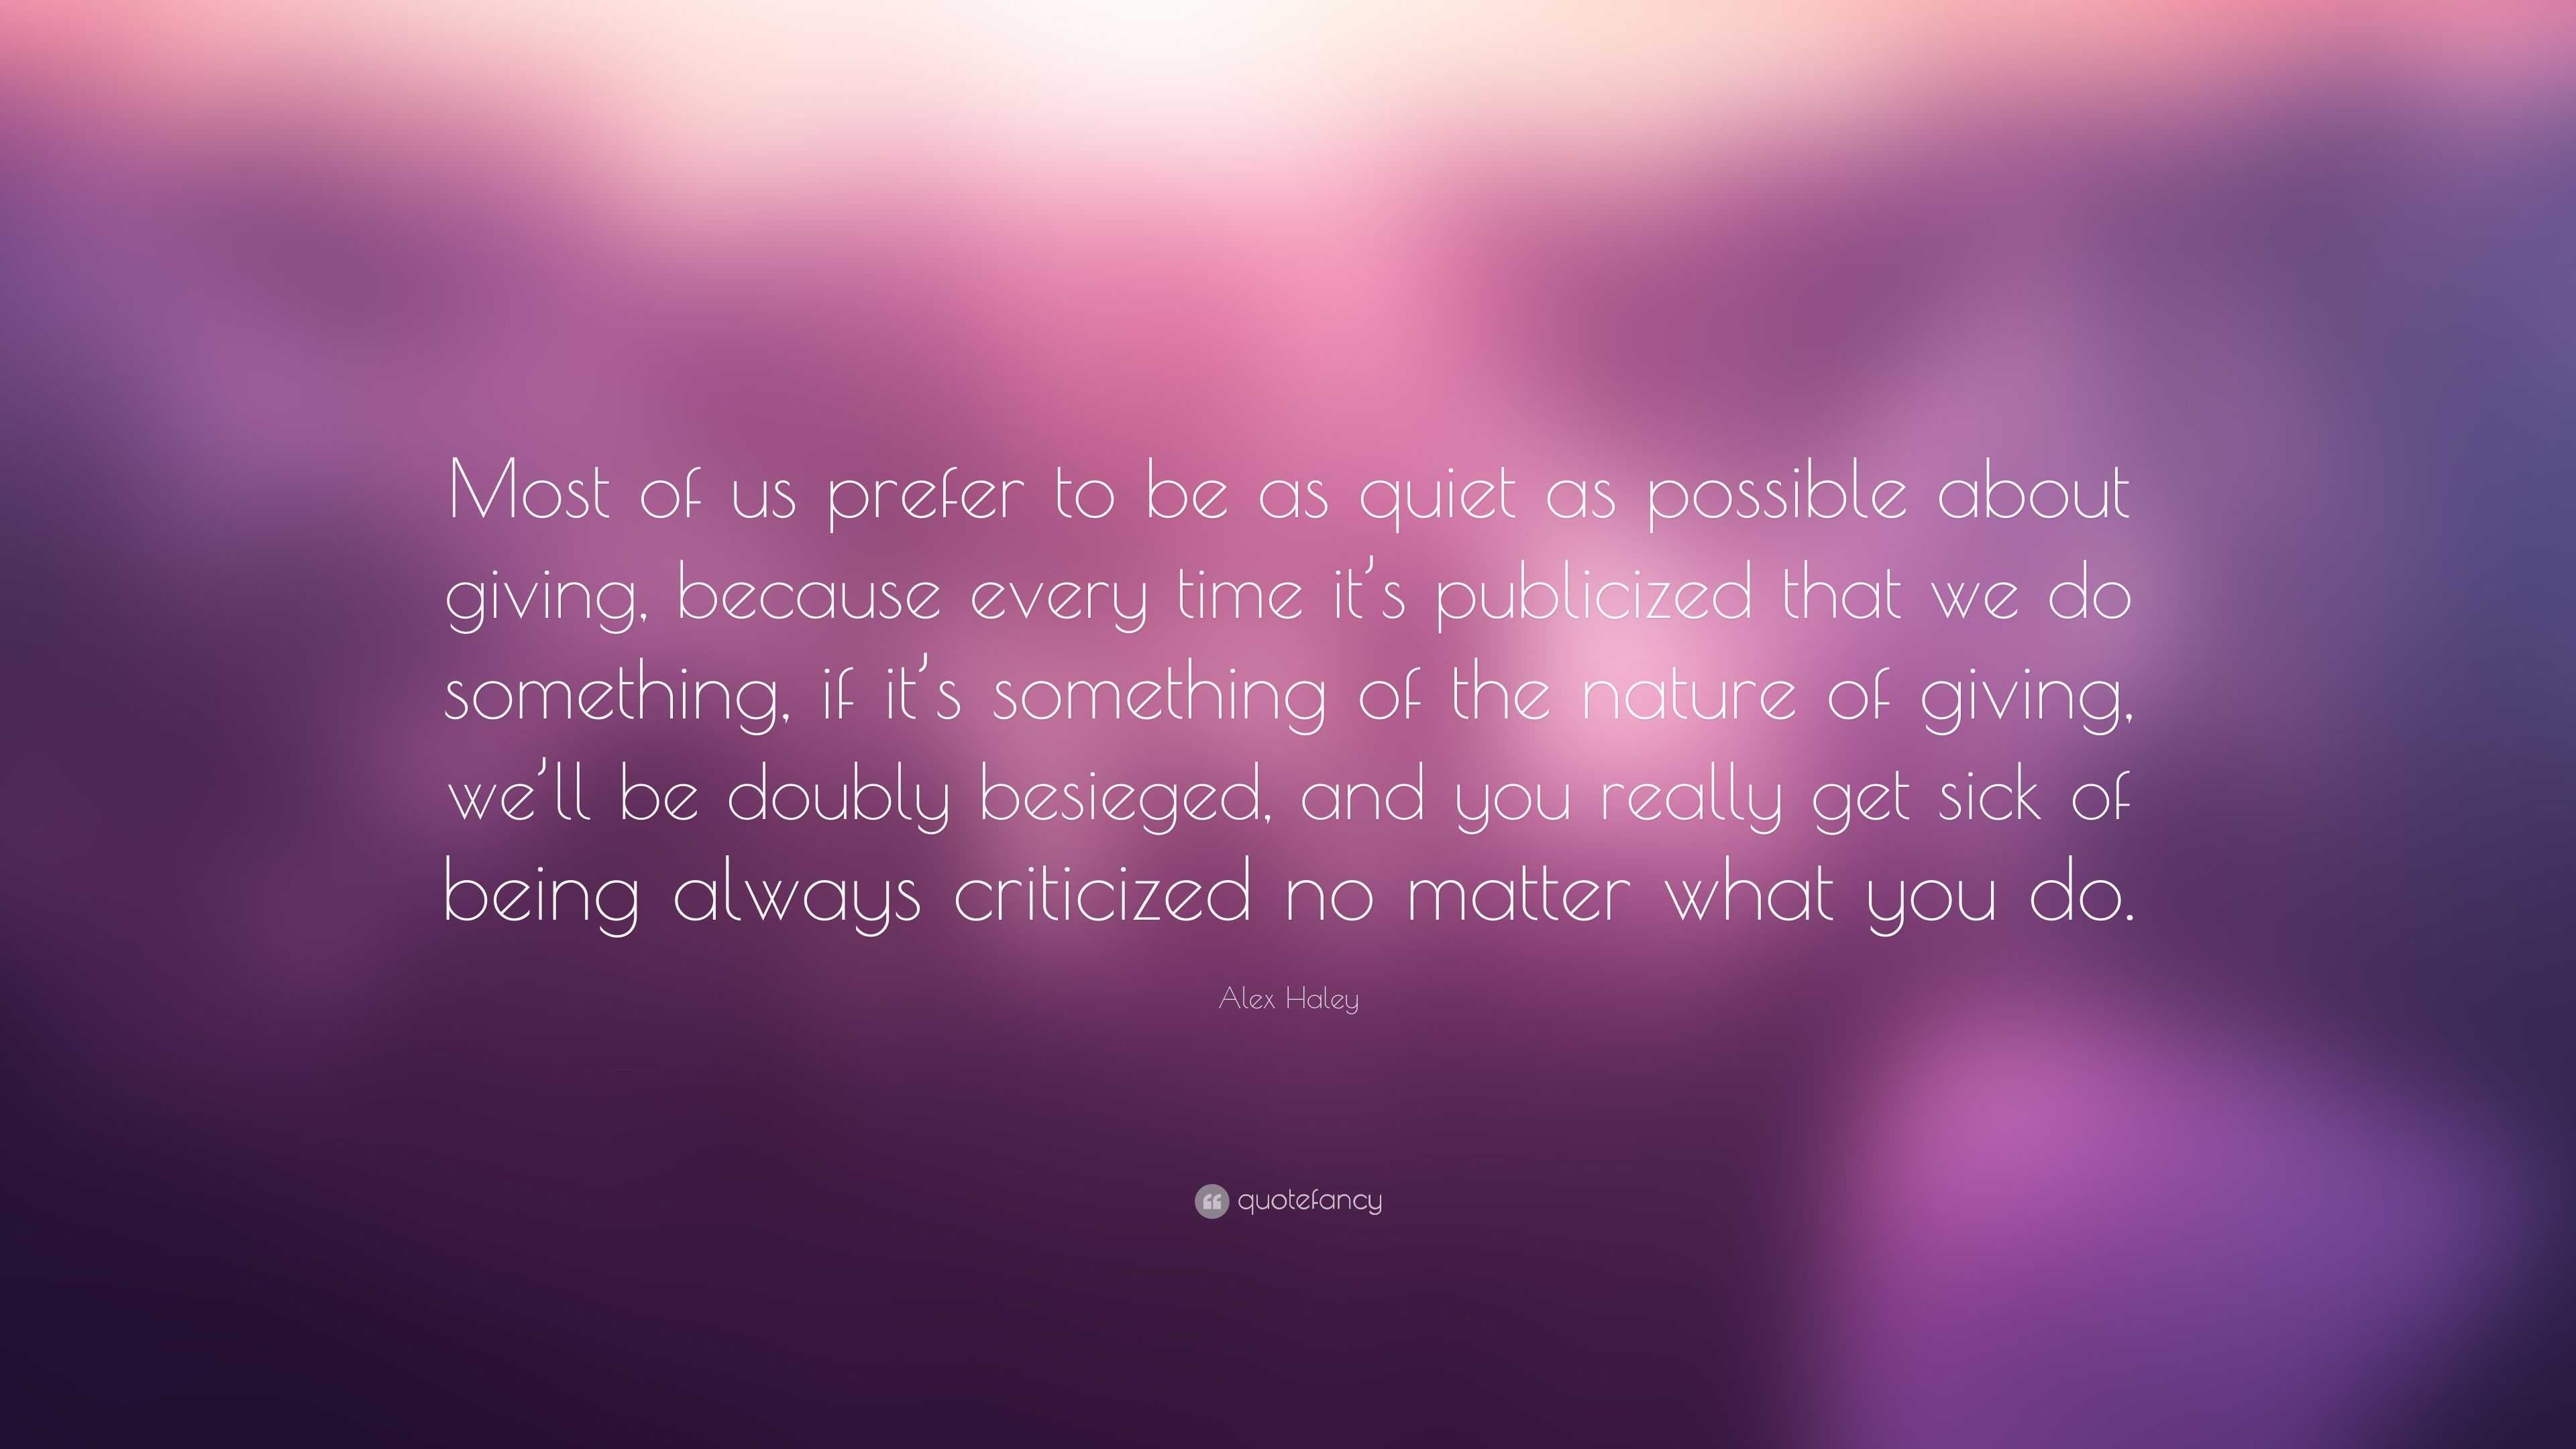 Alex Haley Quote: “Most of us prefer to be as quiet as possible about ...